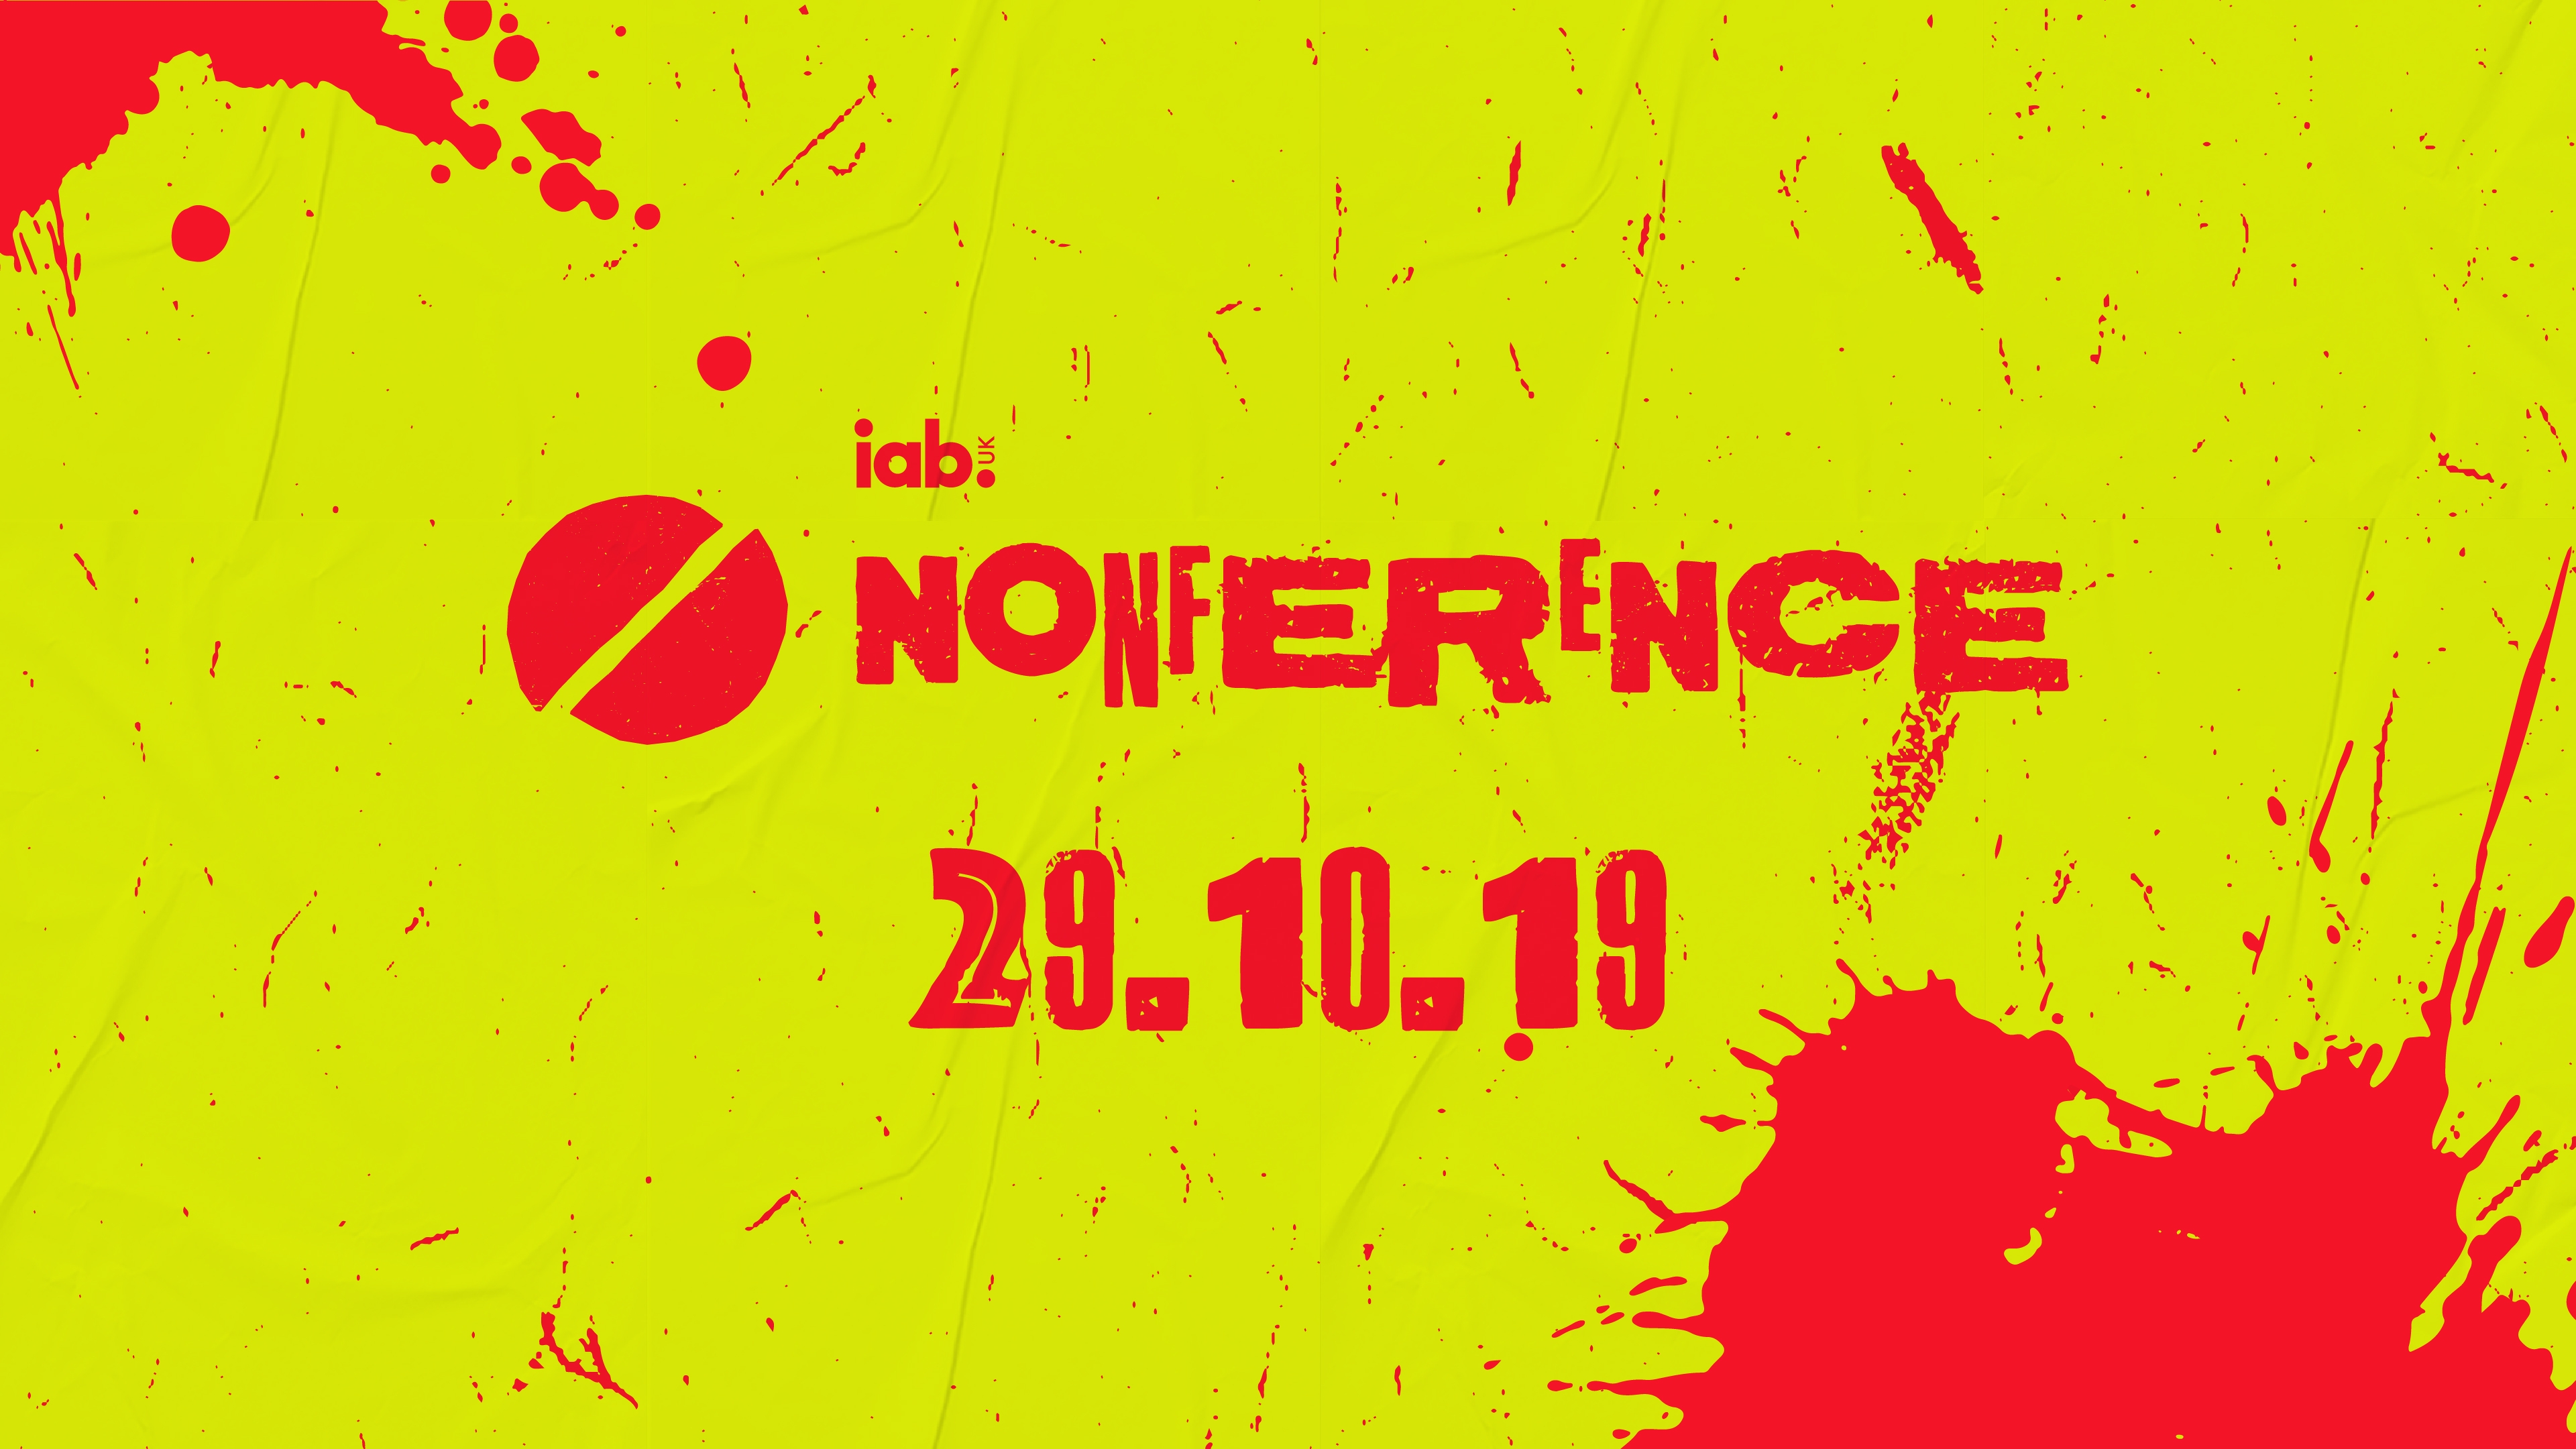 Unruly to Host Quiet Riot at Nonference 2019